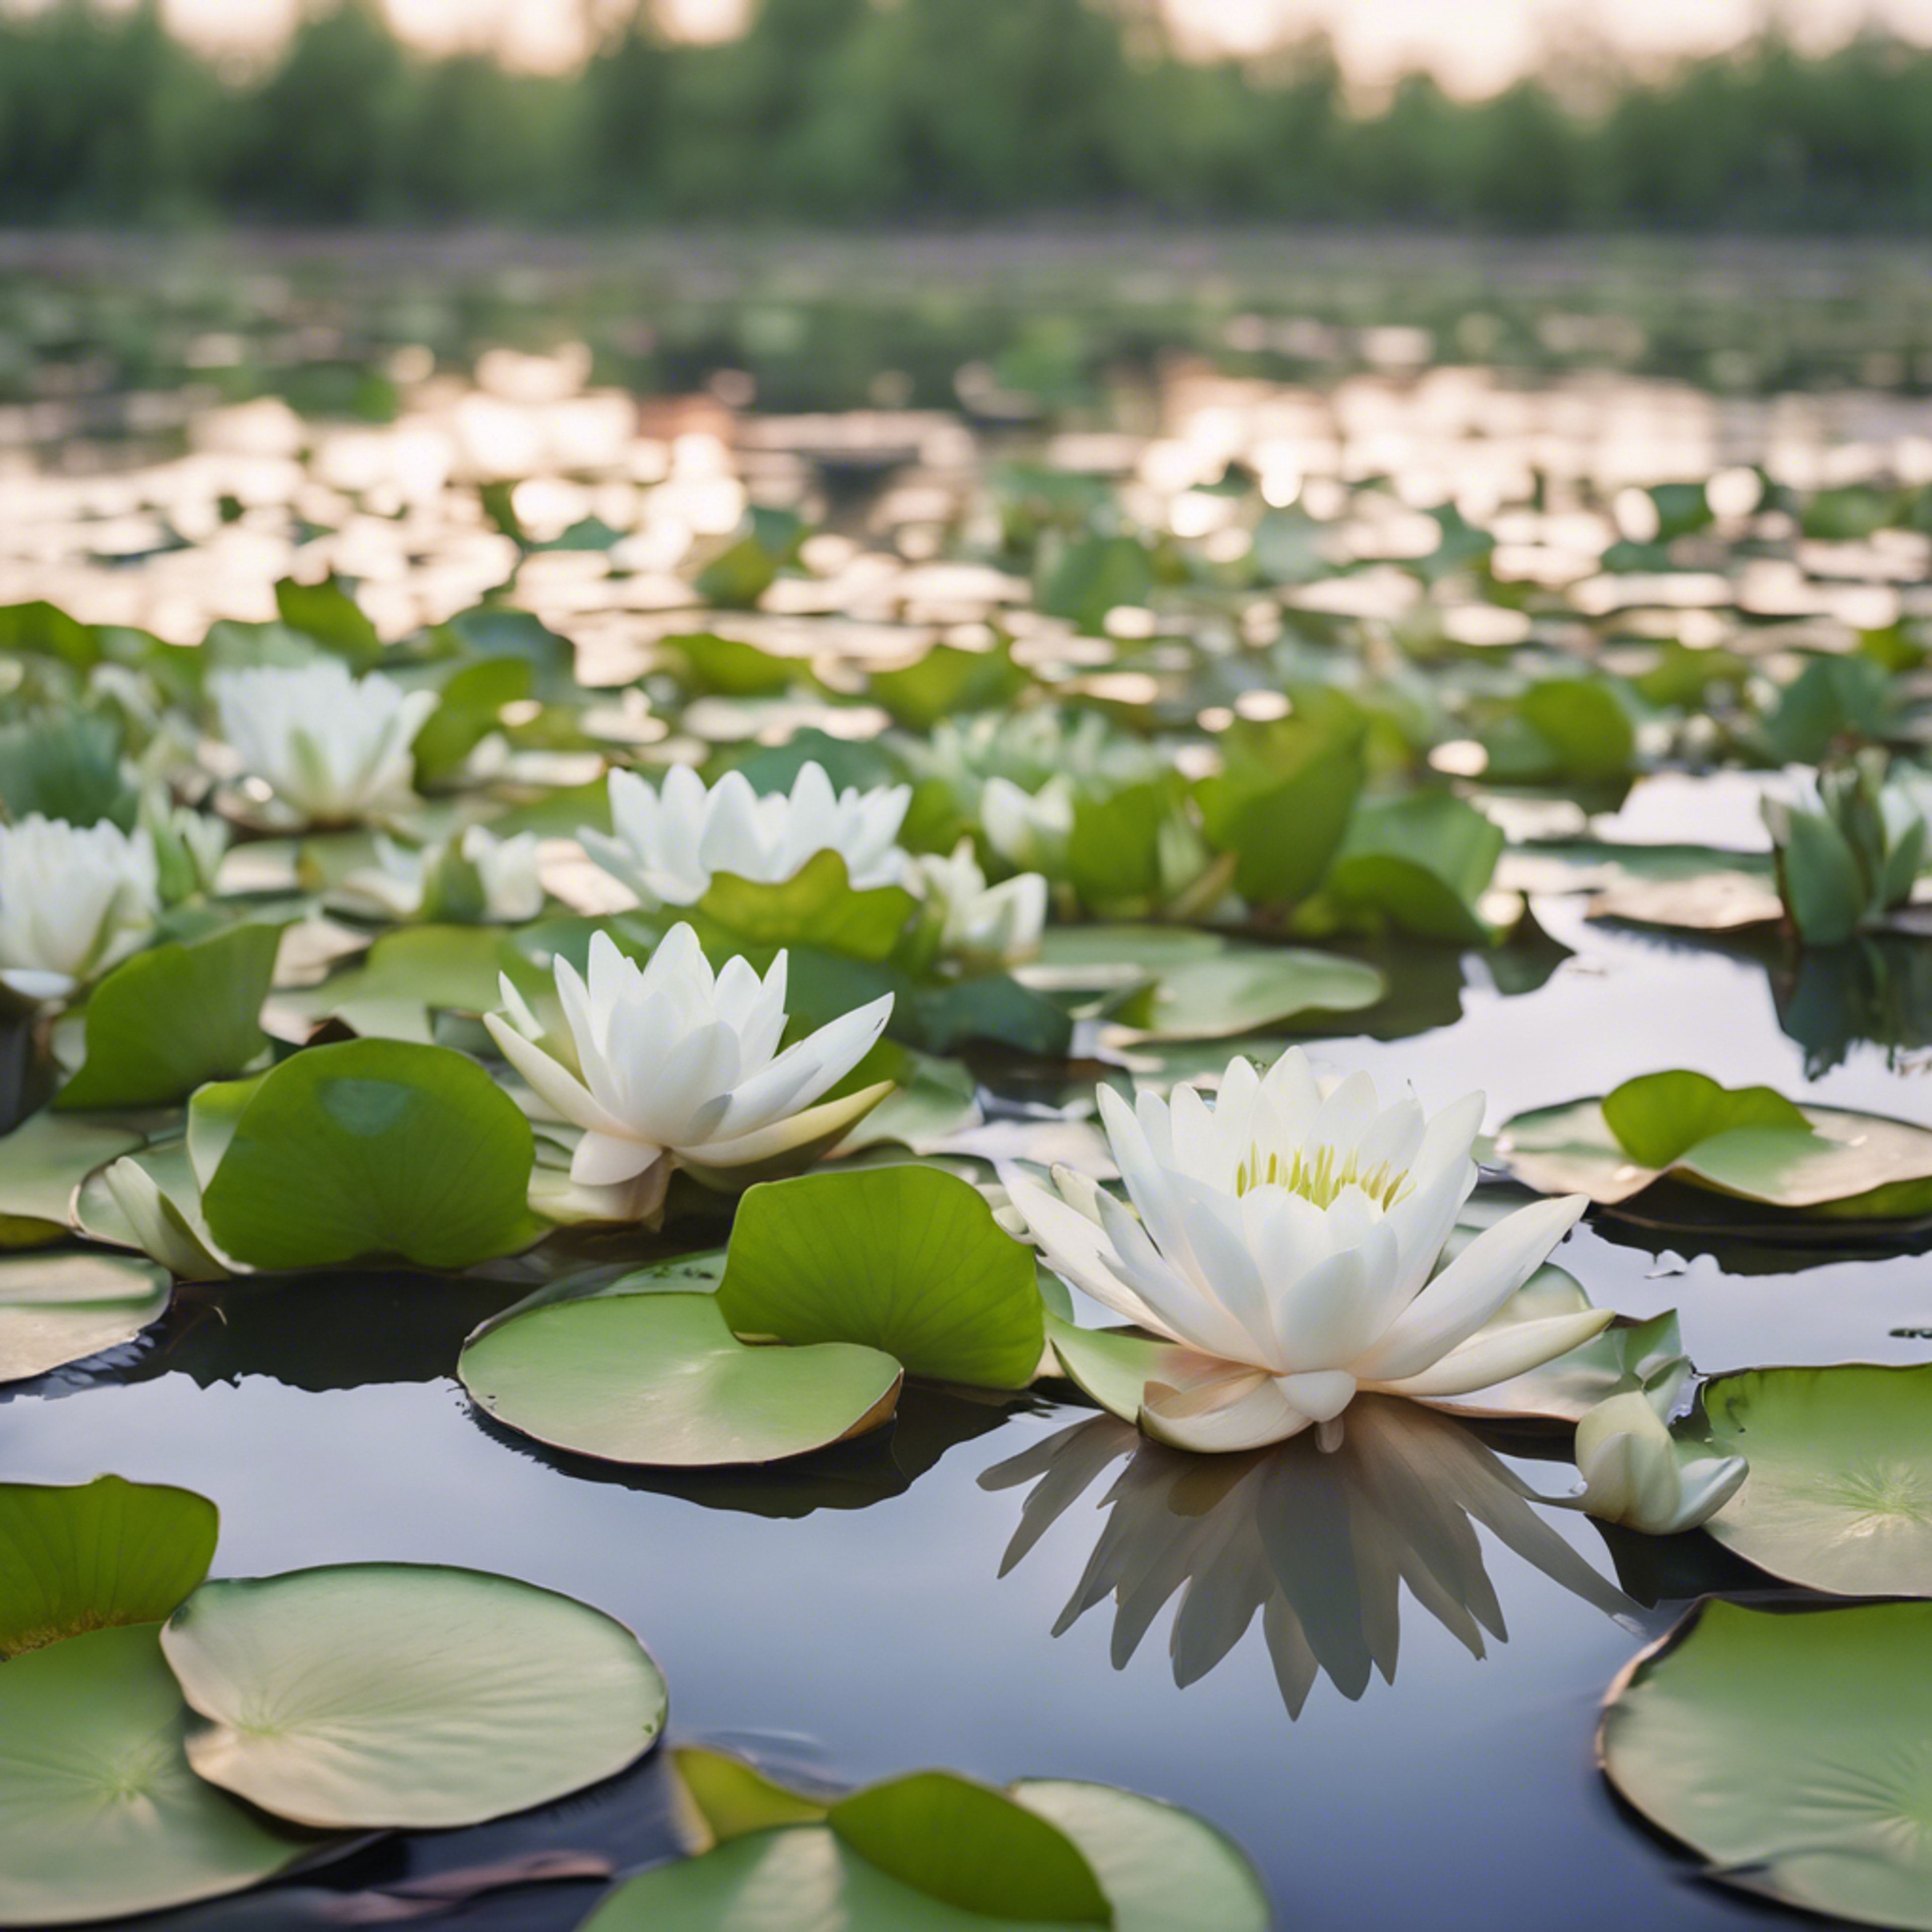 A tranquil lily pond with light green lily pads and budding flowers. Wallpaper[e3bf8ad191934de7ab8c]